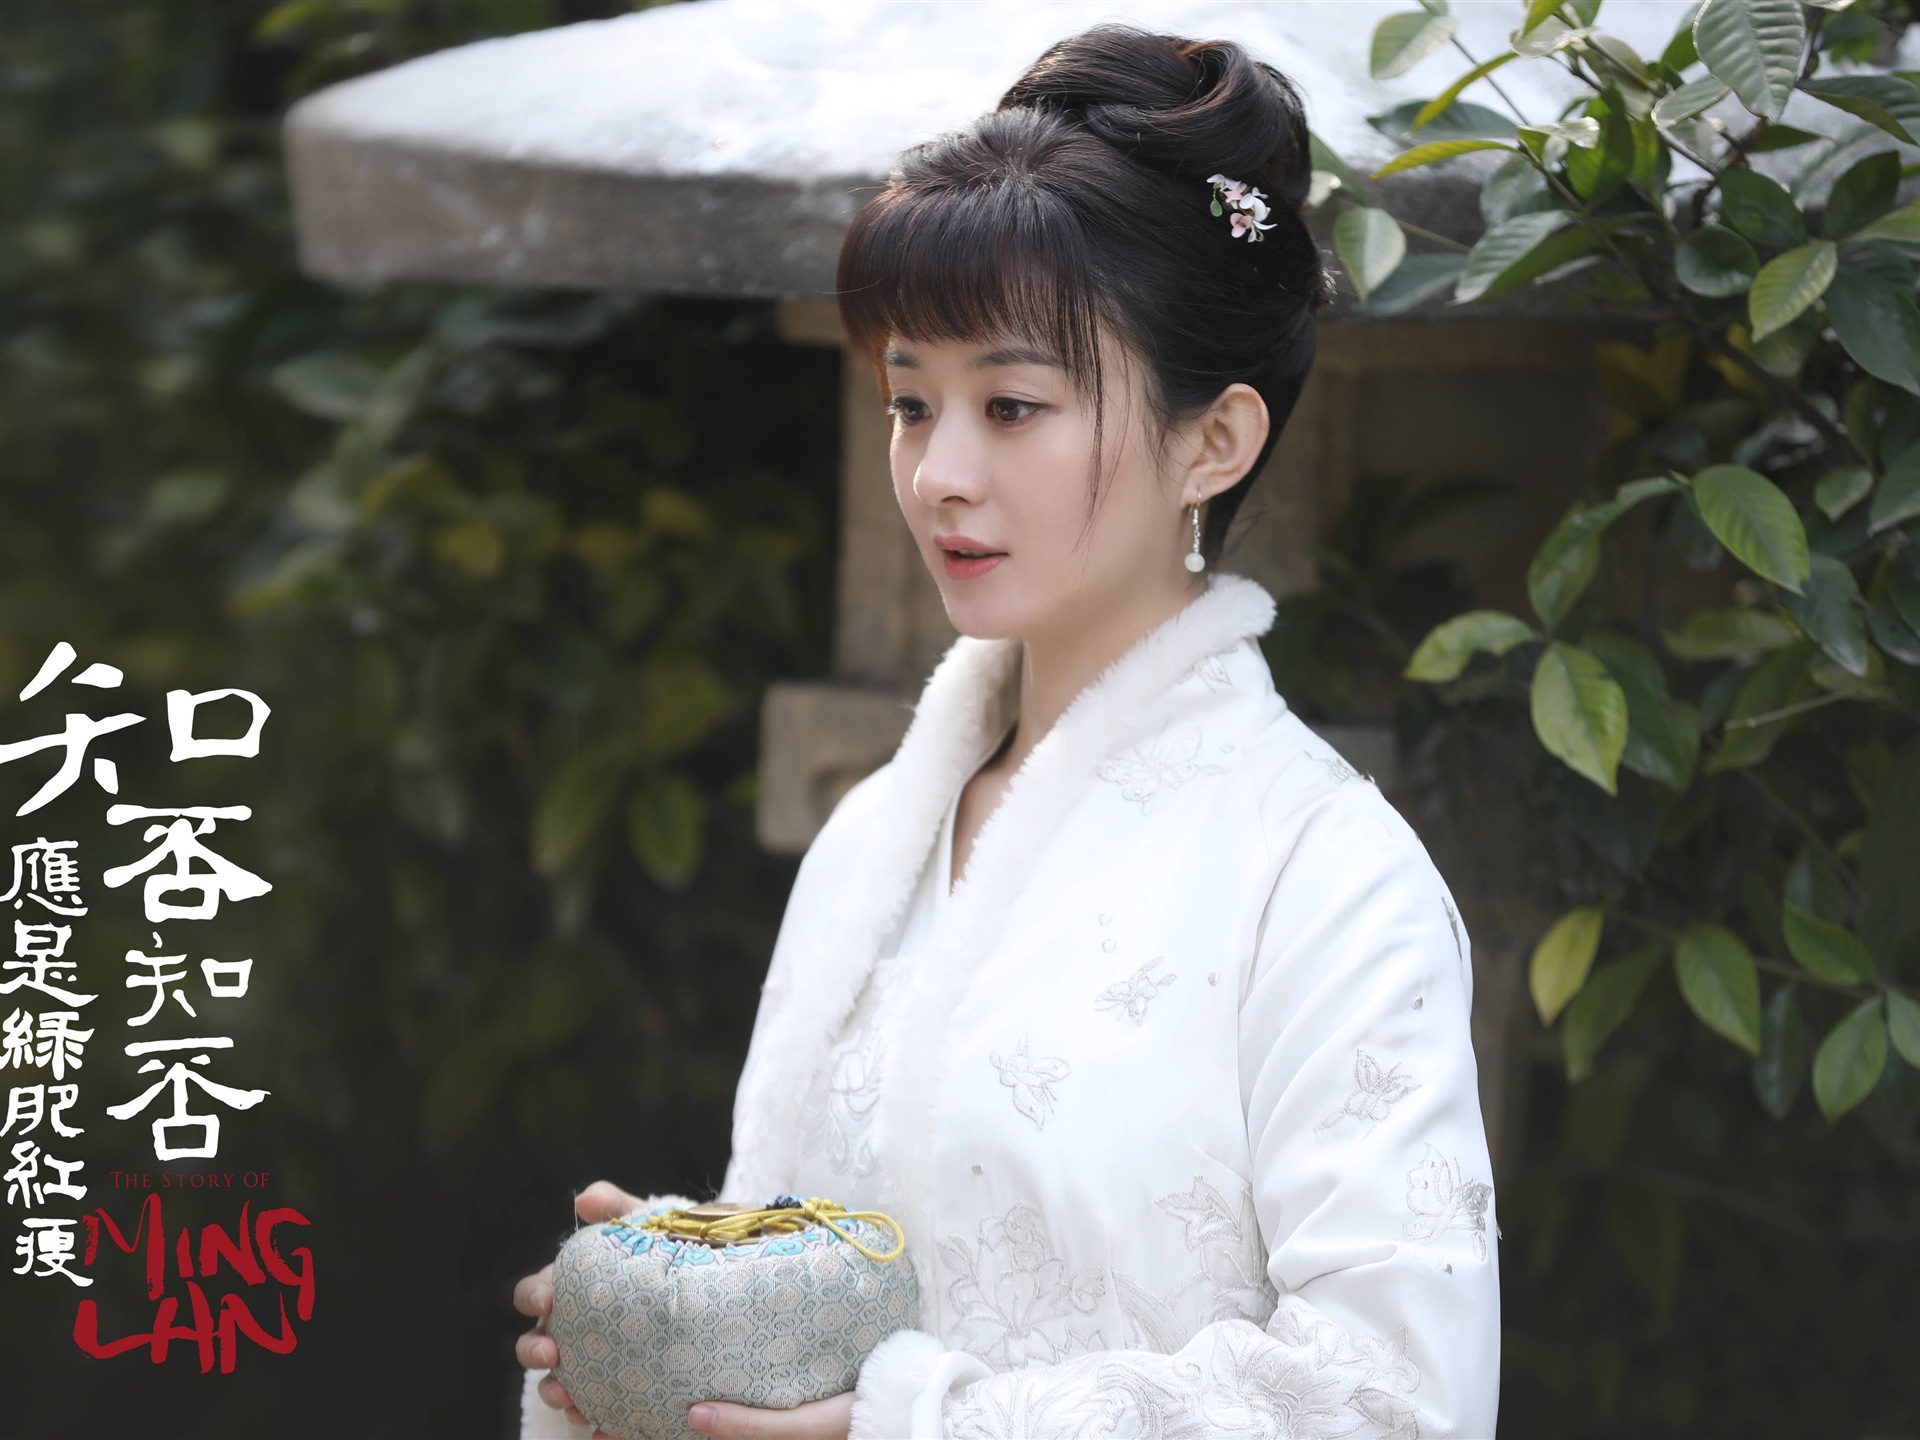 The Story Of MingLan, TV series HD wallpapers #51 - 1920x1440